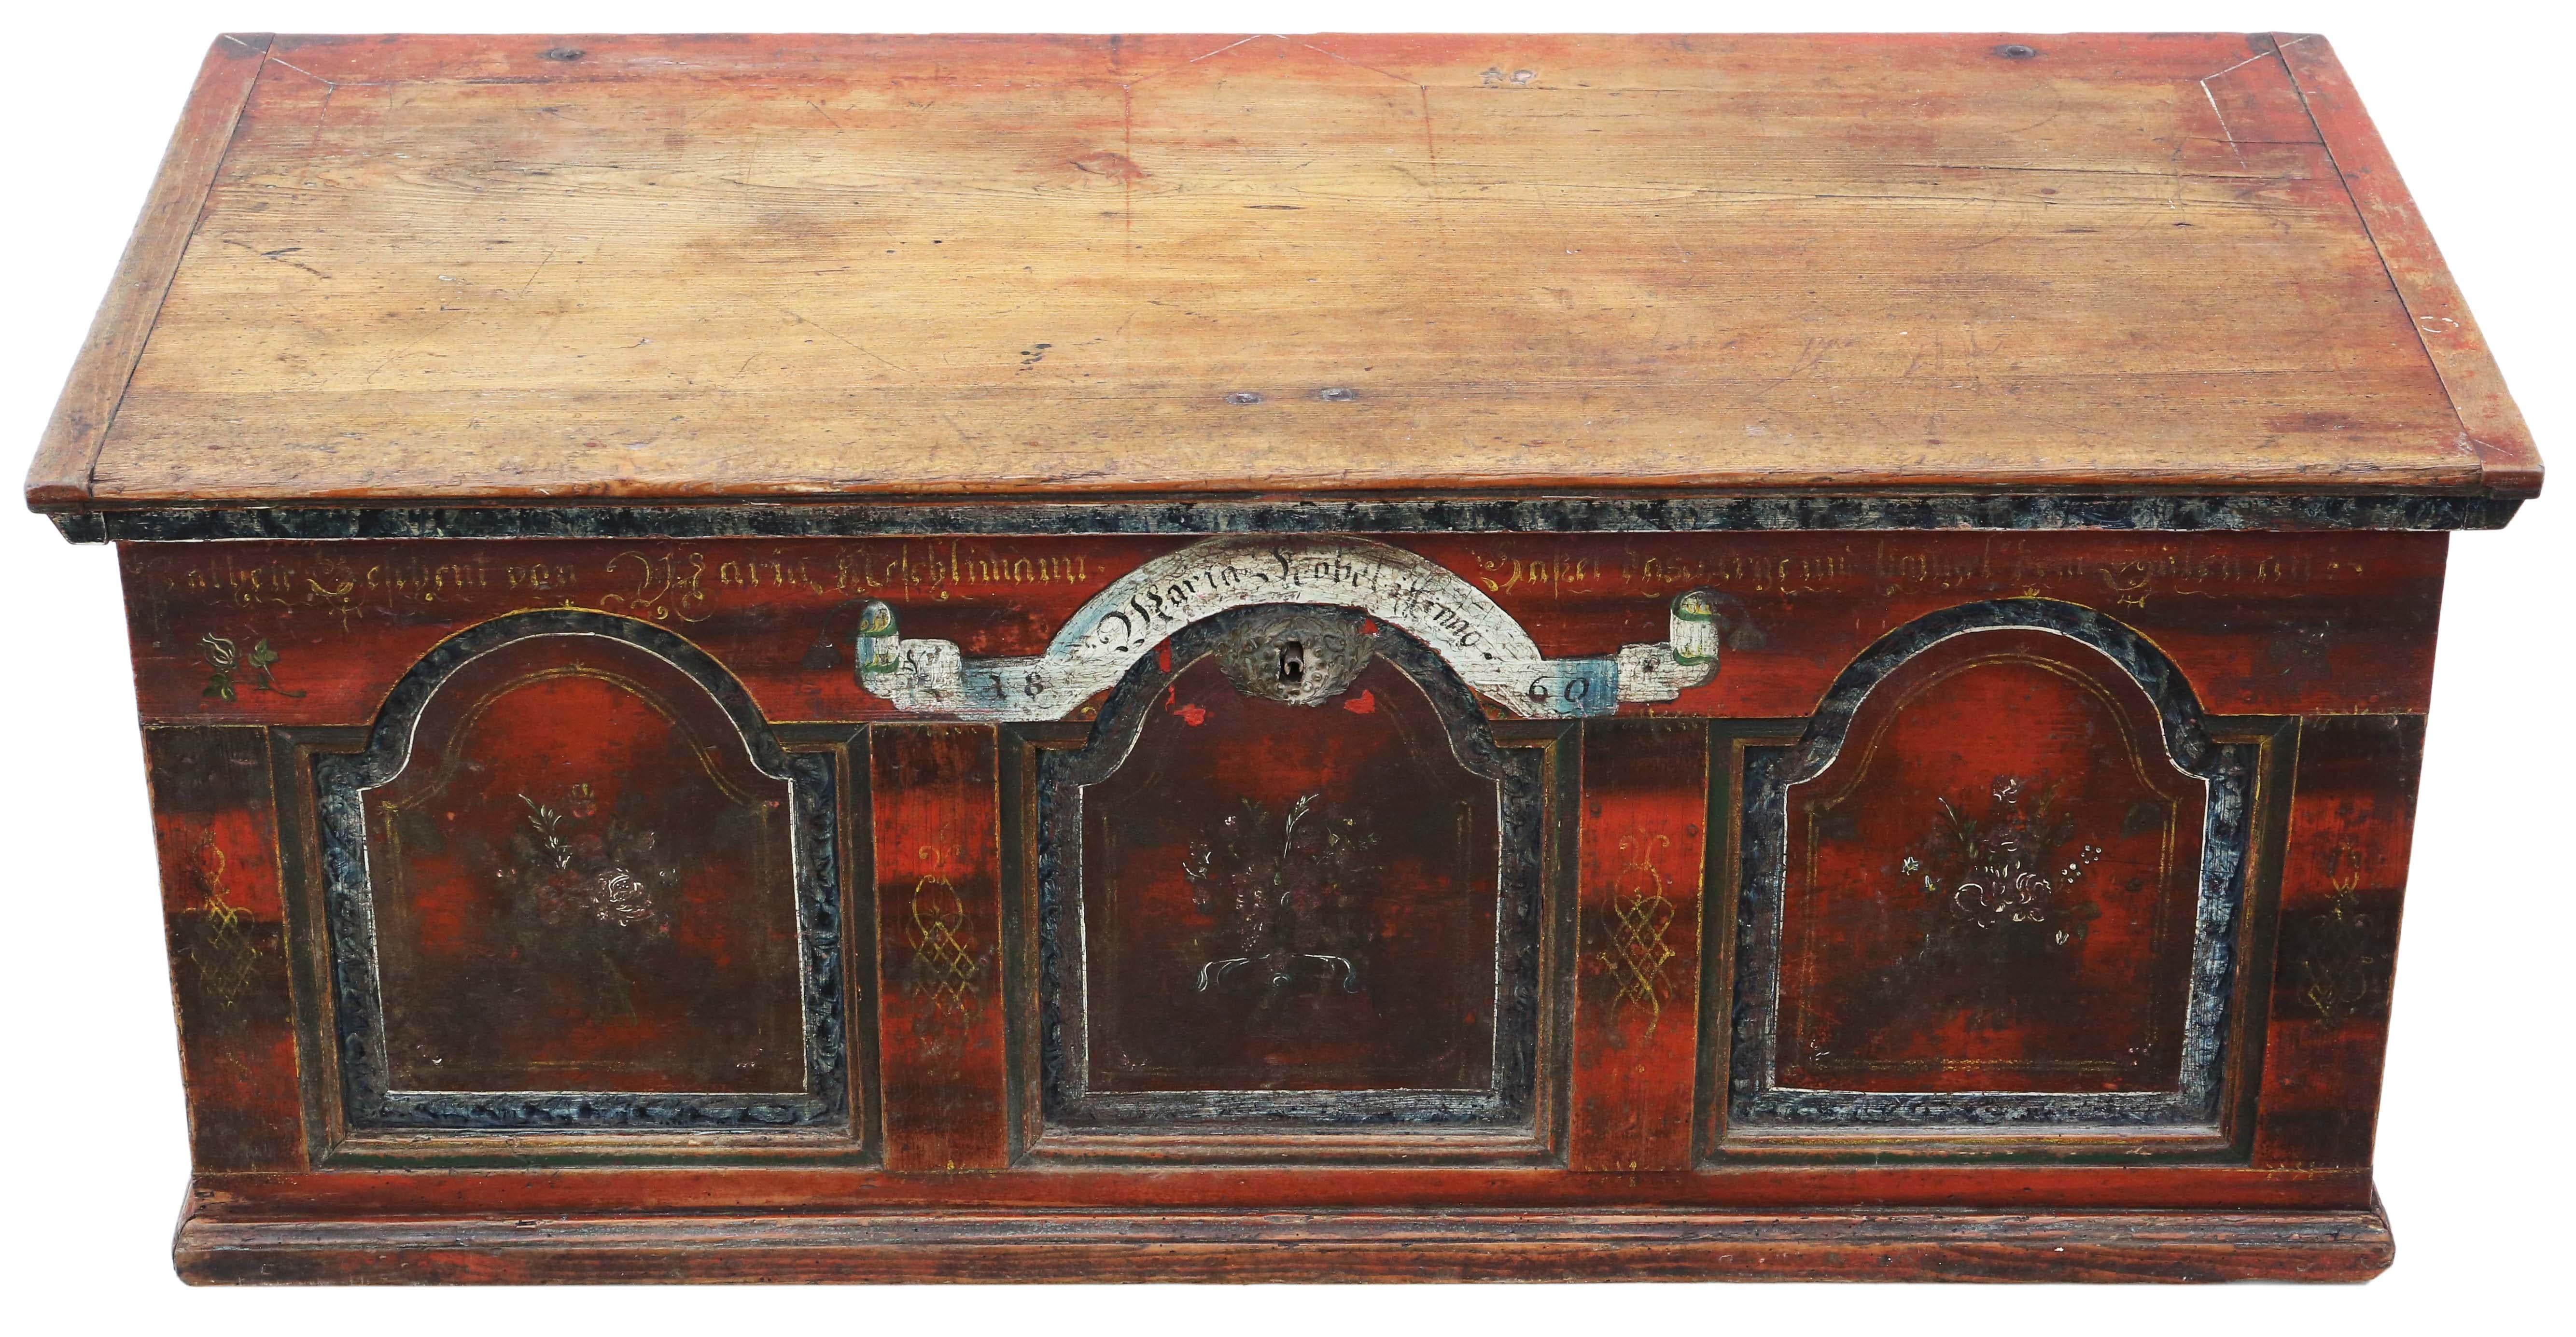 Antique 19th century painted coffer box marriage chest. Dated 1860. These are now quite sought after.

No loose joints and full of age, character and charm.

Would look great in the right location!

Overall maximum dimensions: 117cmW x 57cmD x